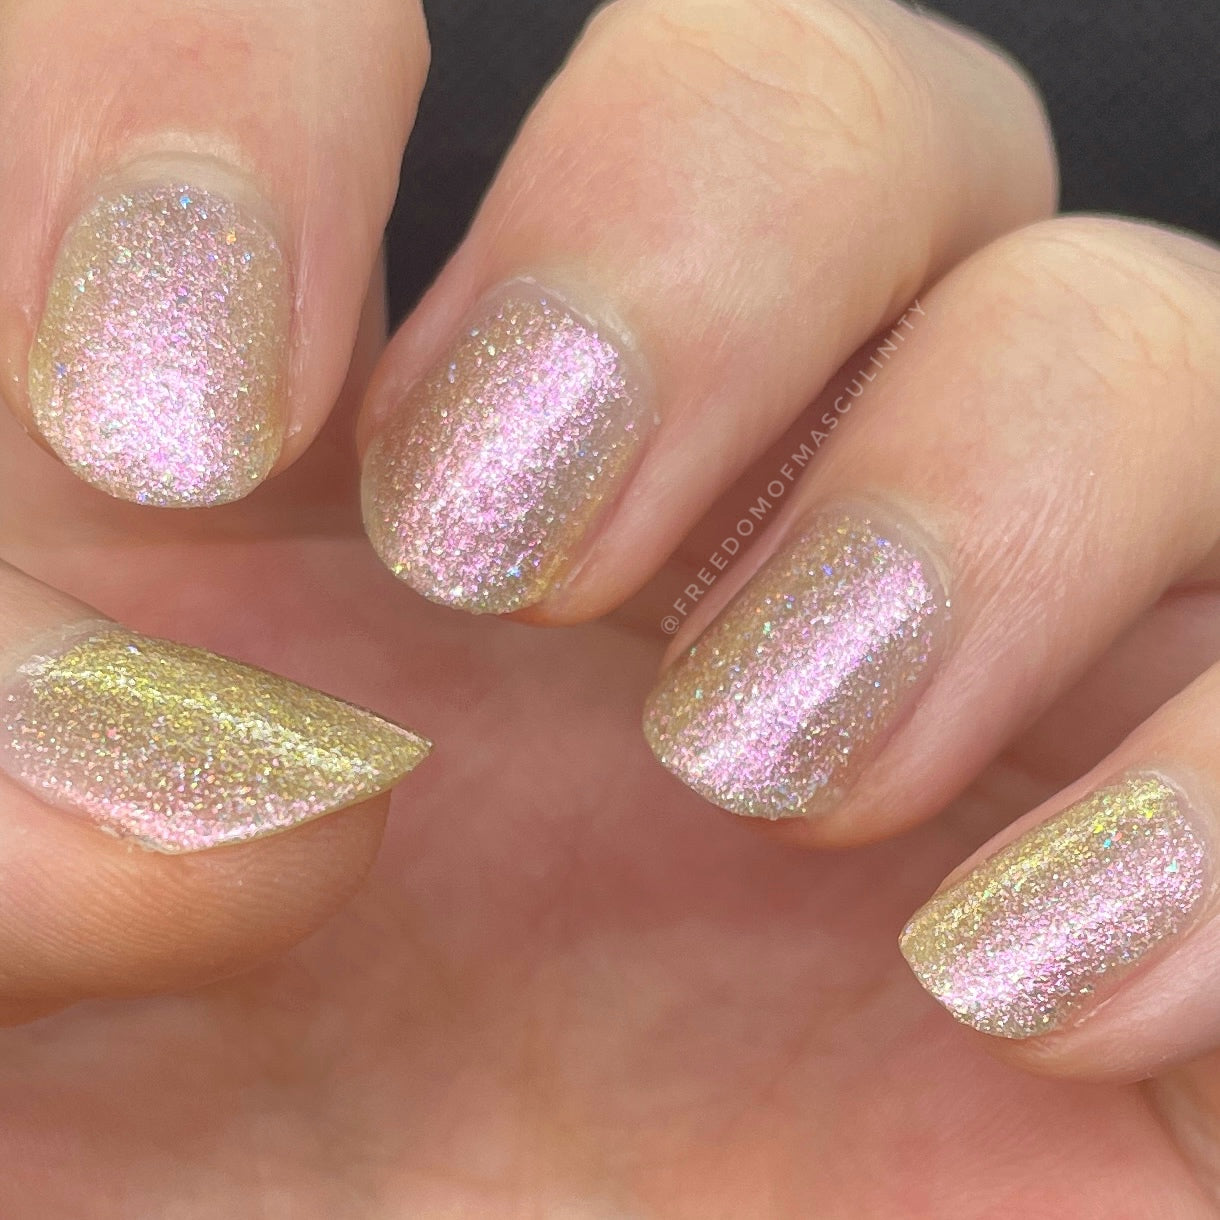 nail enamel by itself on short nails gold glitter pink shimmer